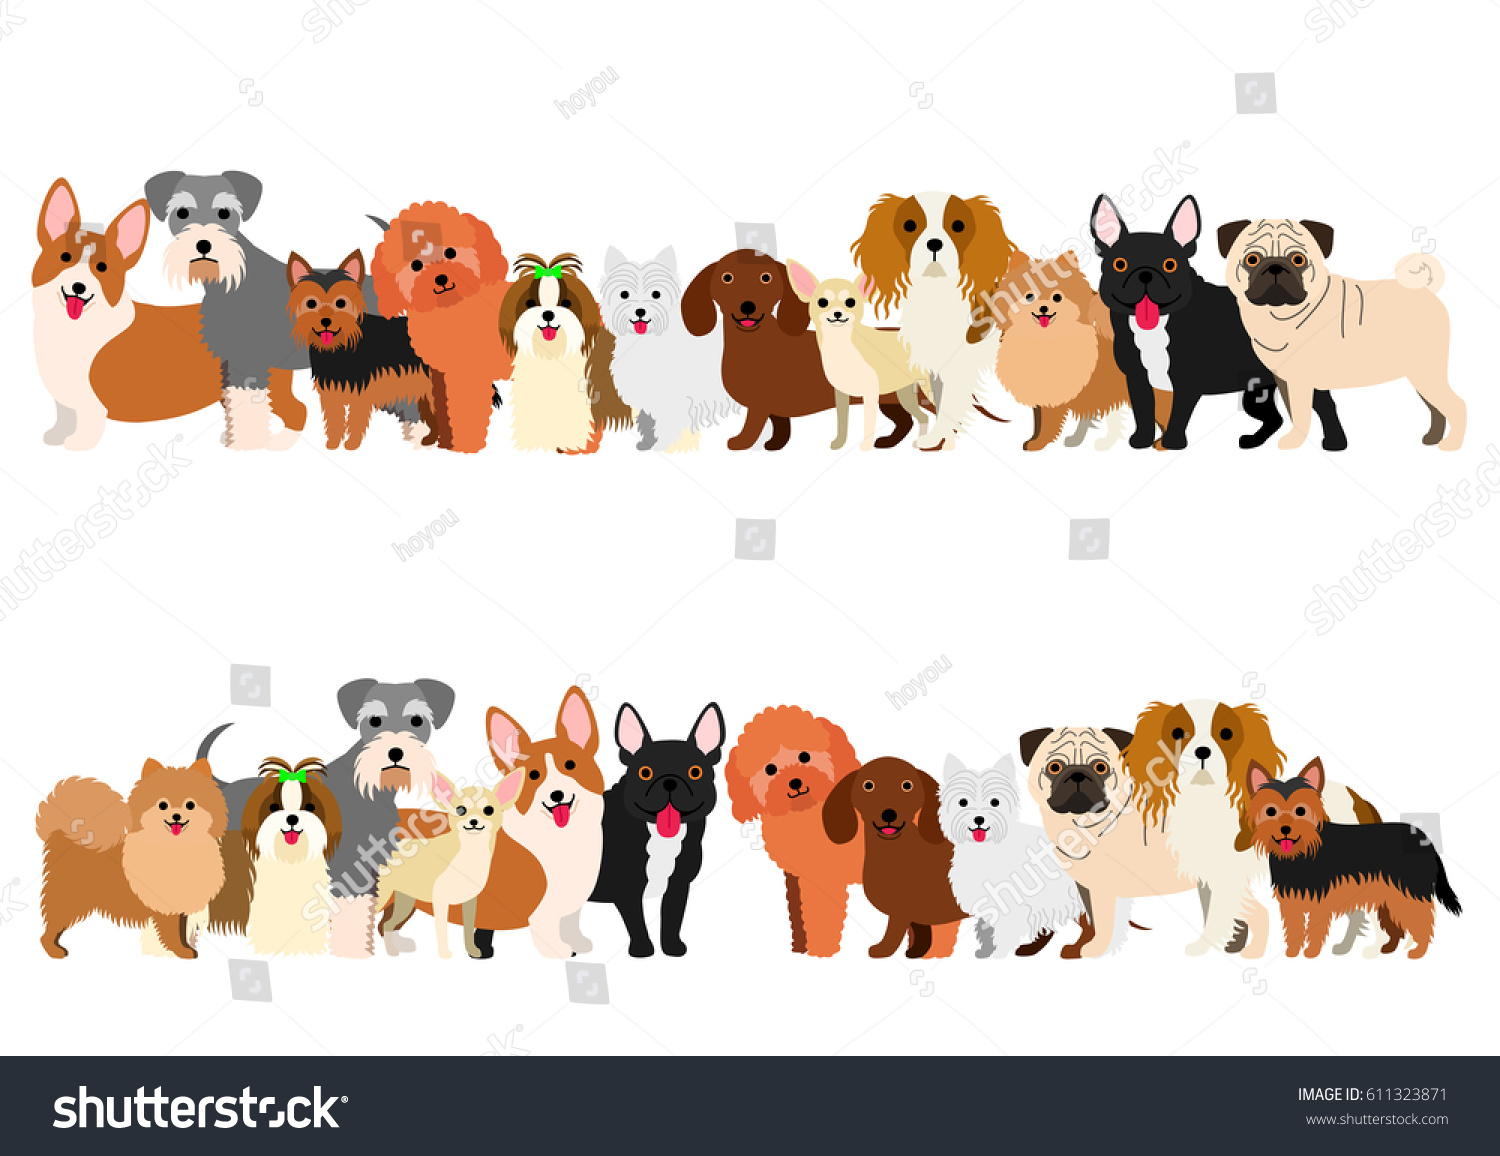 Dogs clipart boarder. Dog border station 